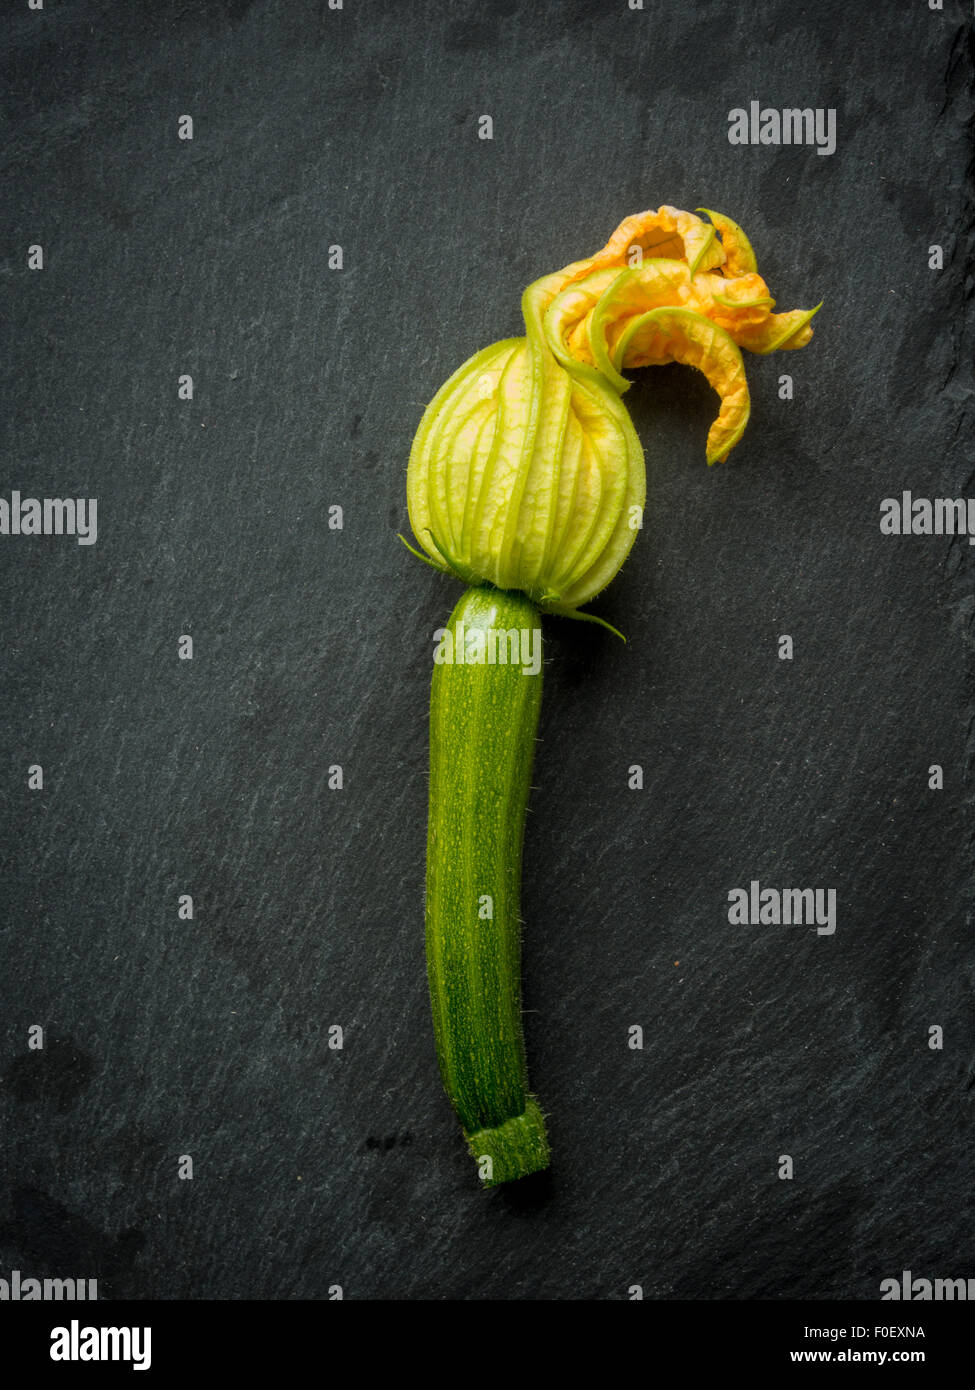 Courgette with flower attached. Stock Photo